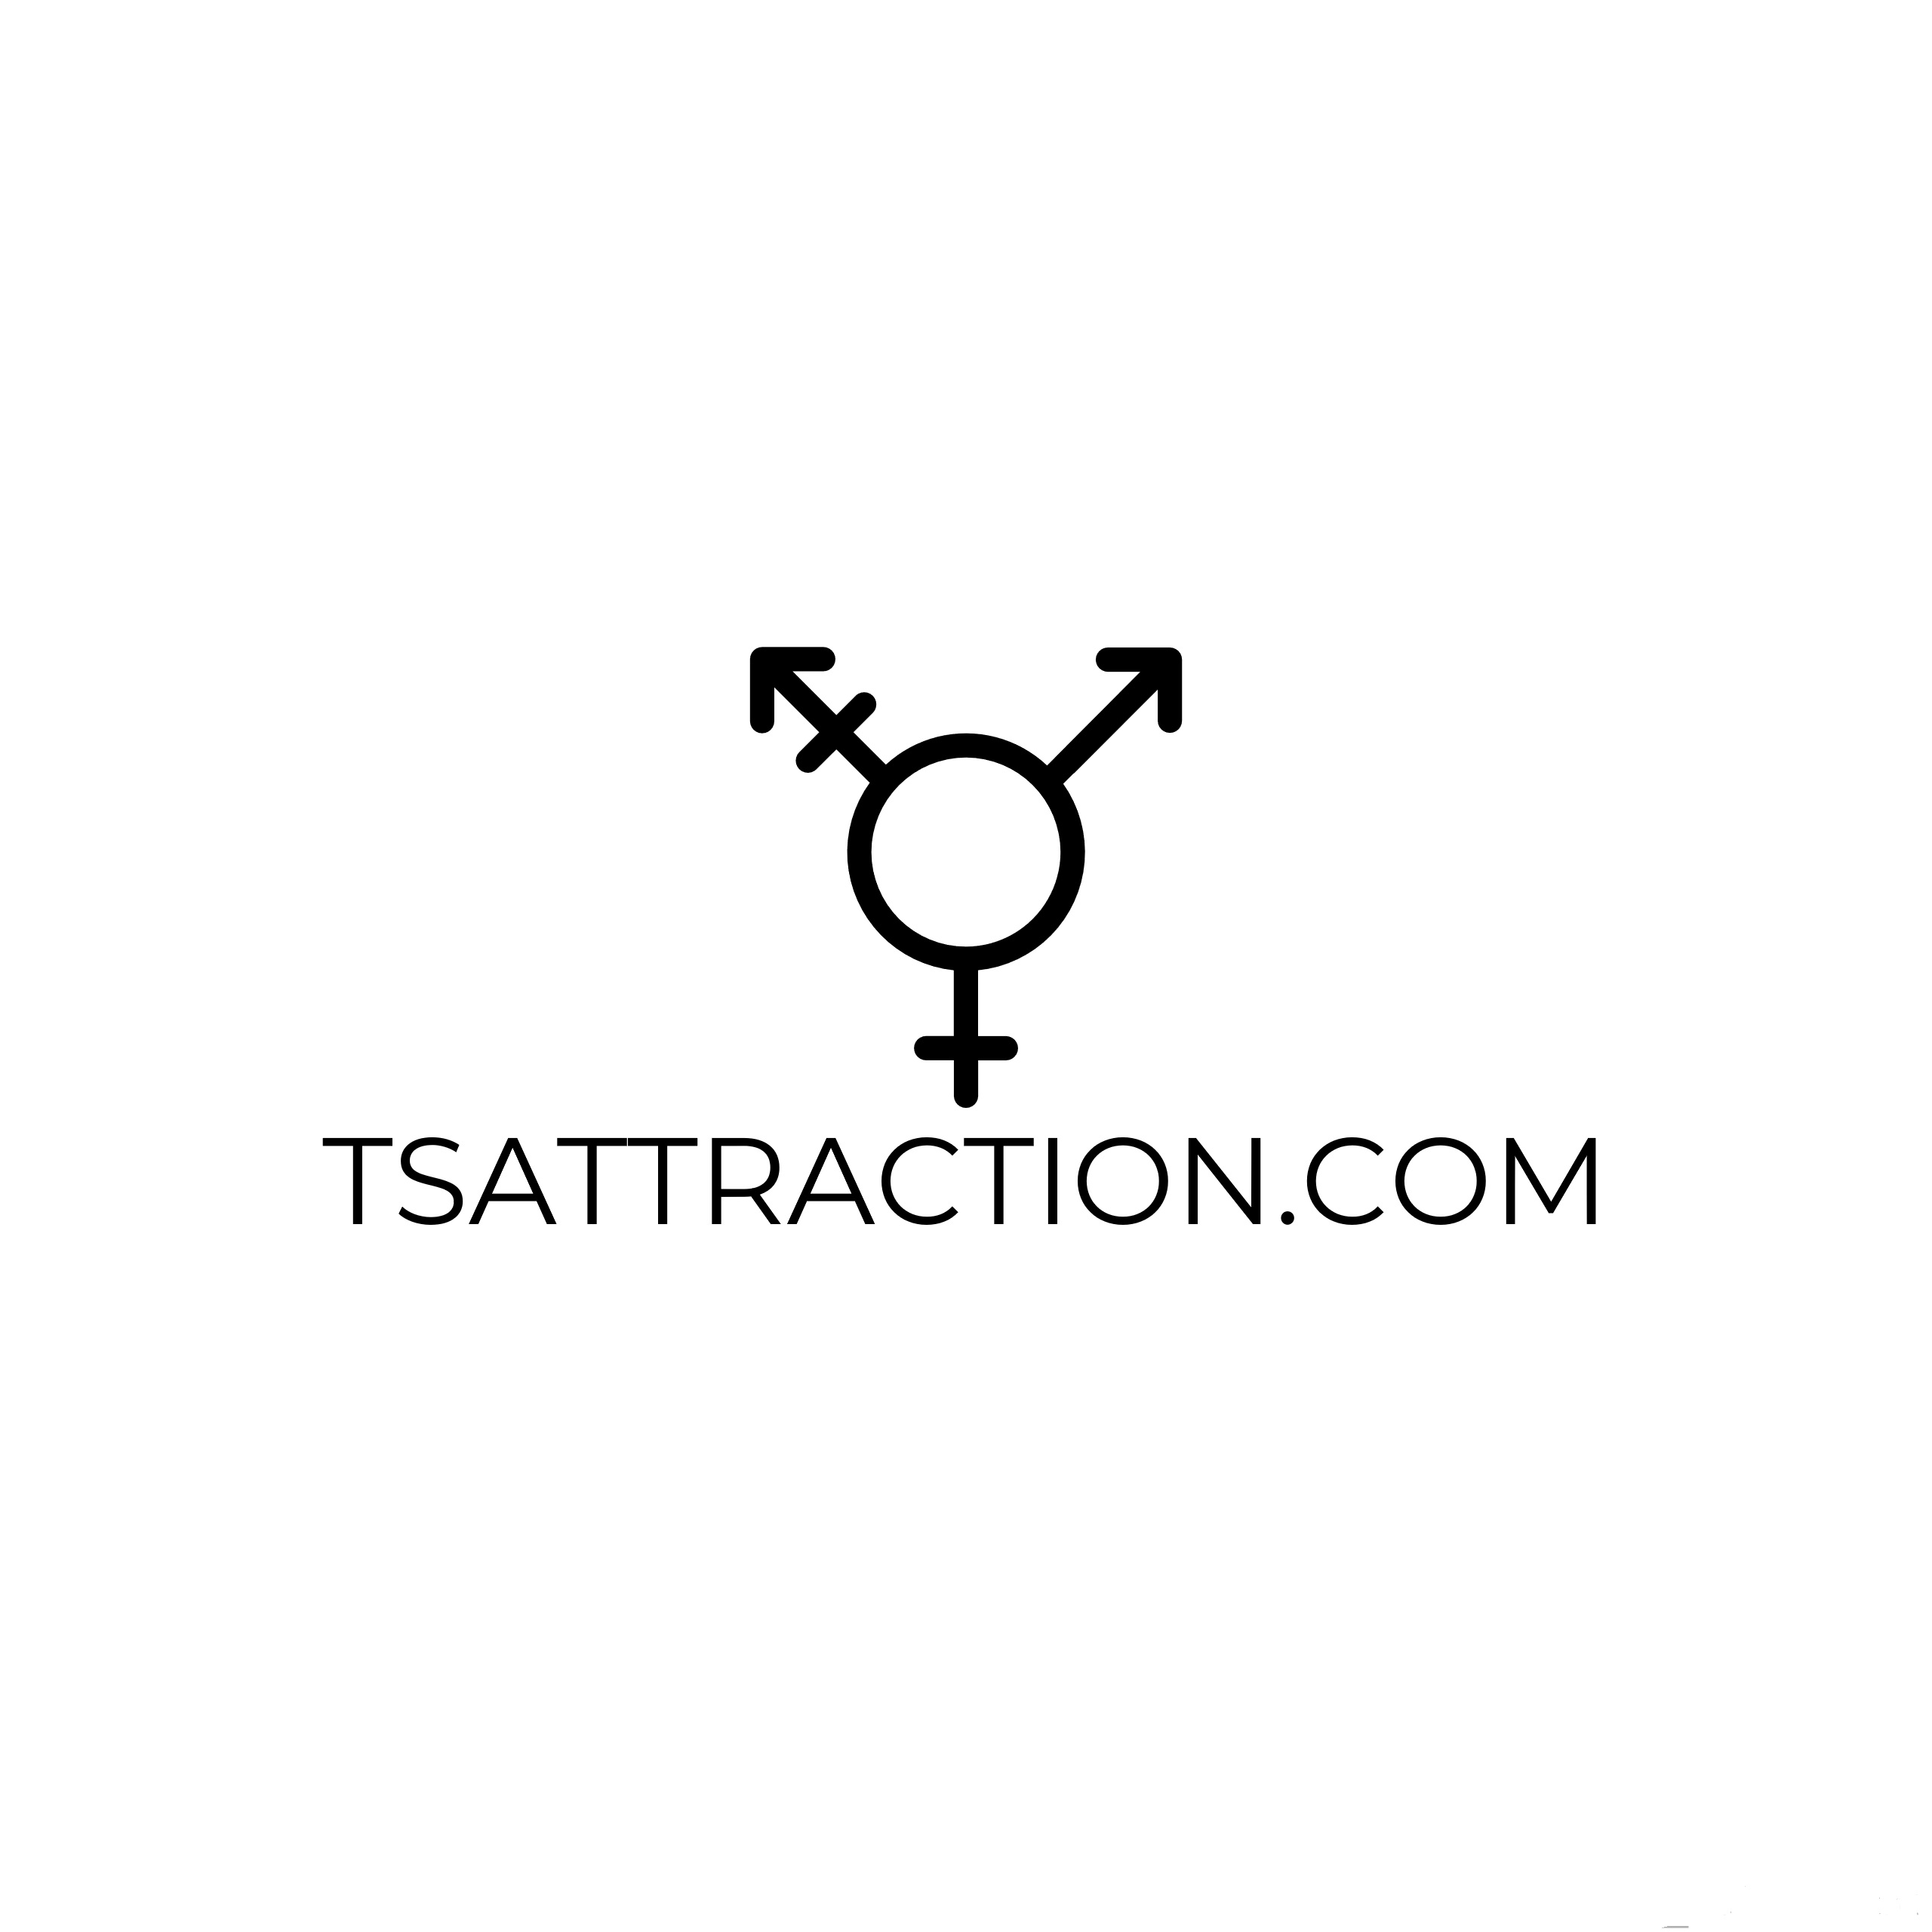 Exclusive Articles & Personal Accounts Discussing Transsexual & Transgender Attraction, Through The Eyes Of A Heterosexual Male